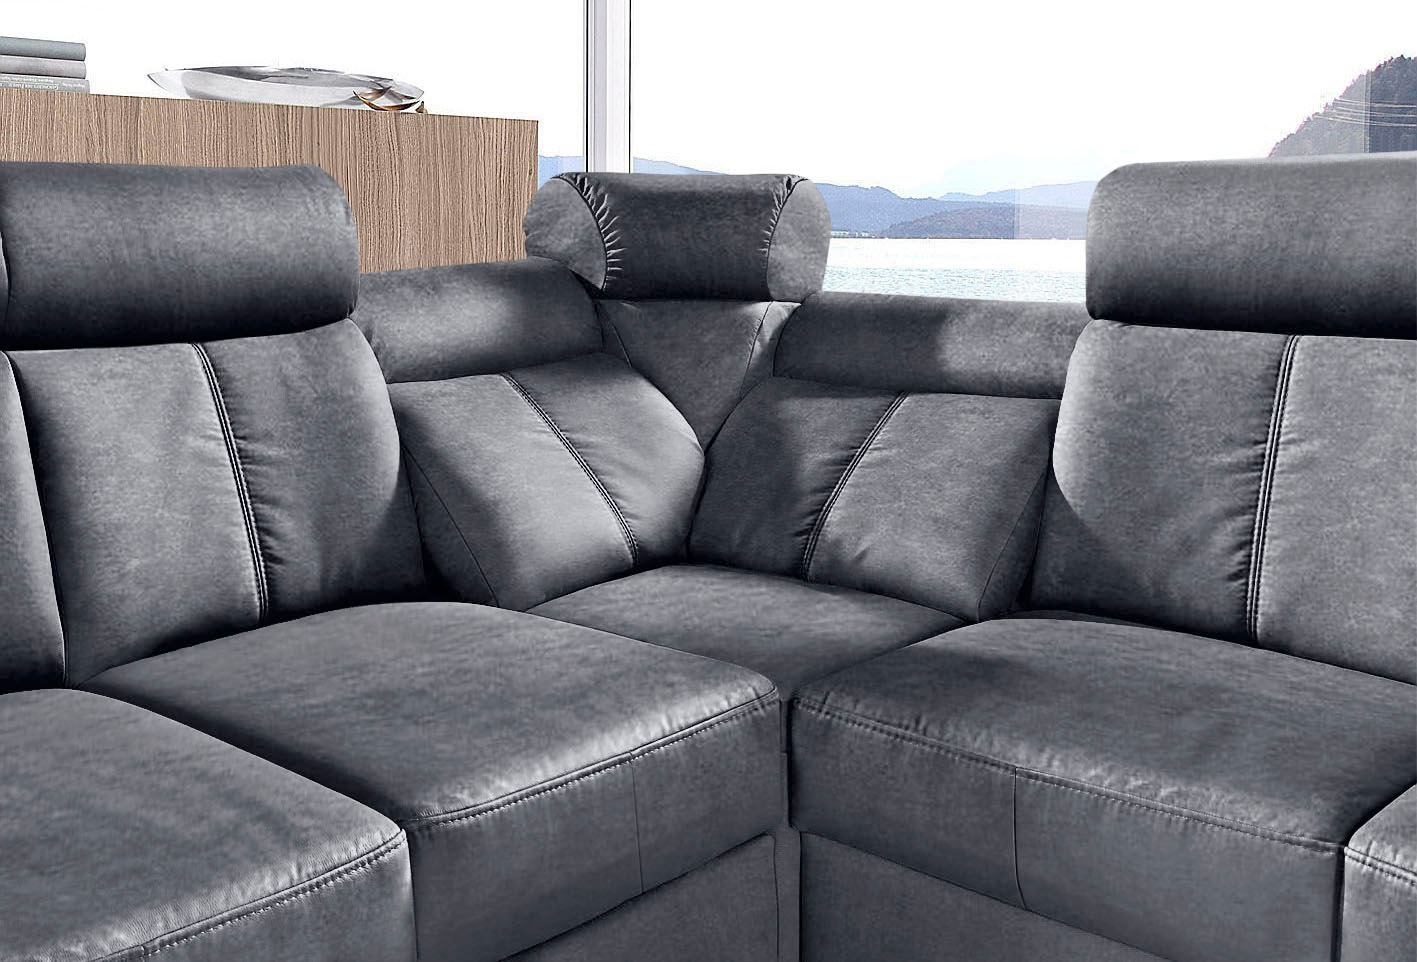 sit&more Ecksofa »Basel L-Form«, wahlweise mit Relaxfunktion